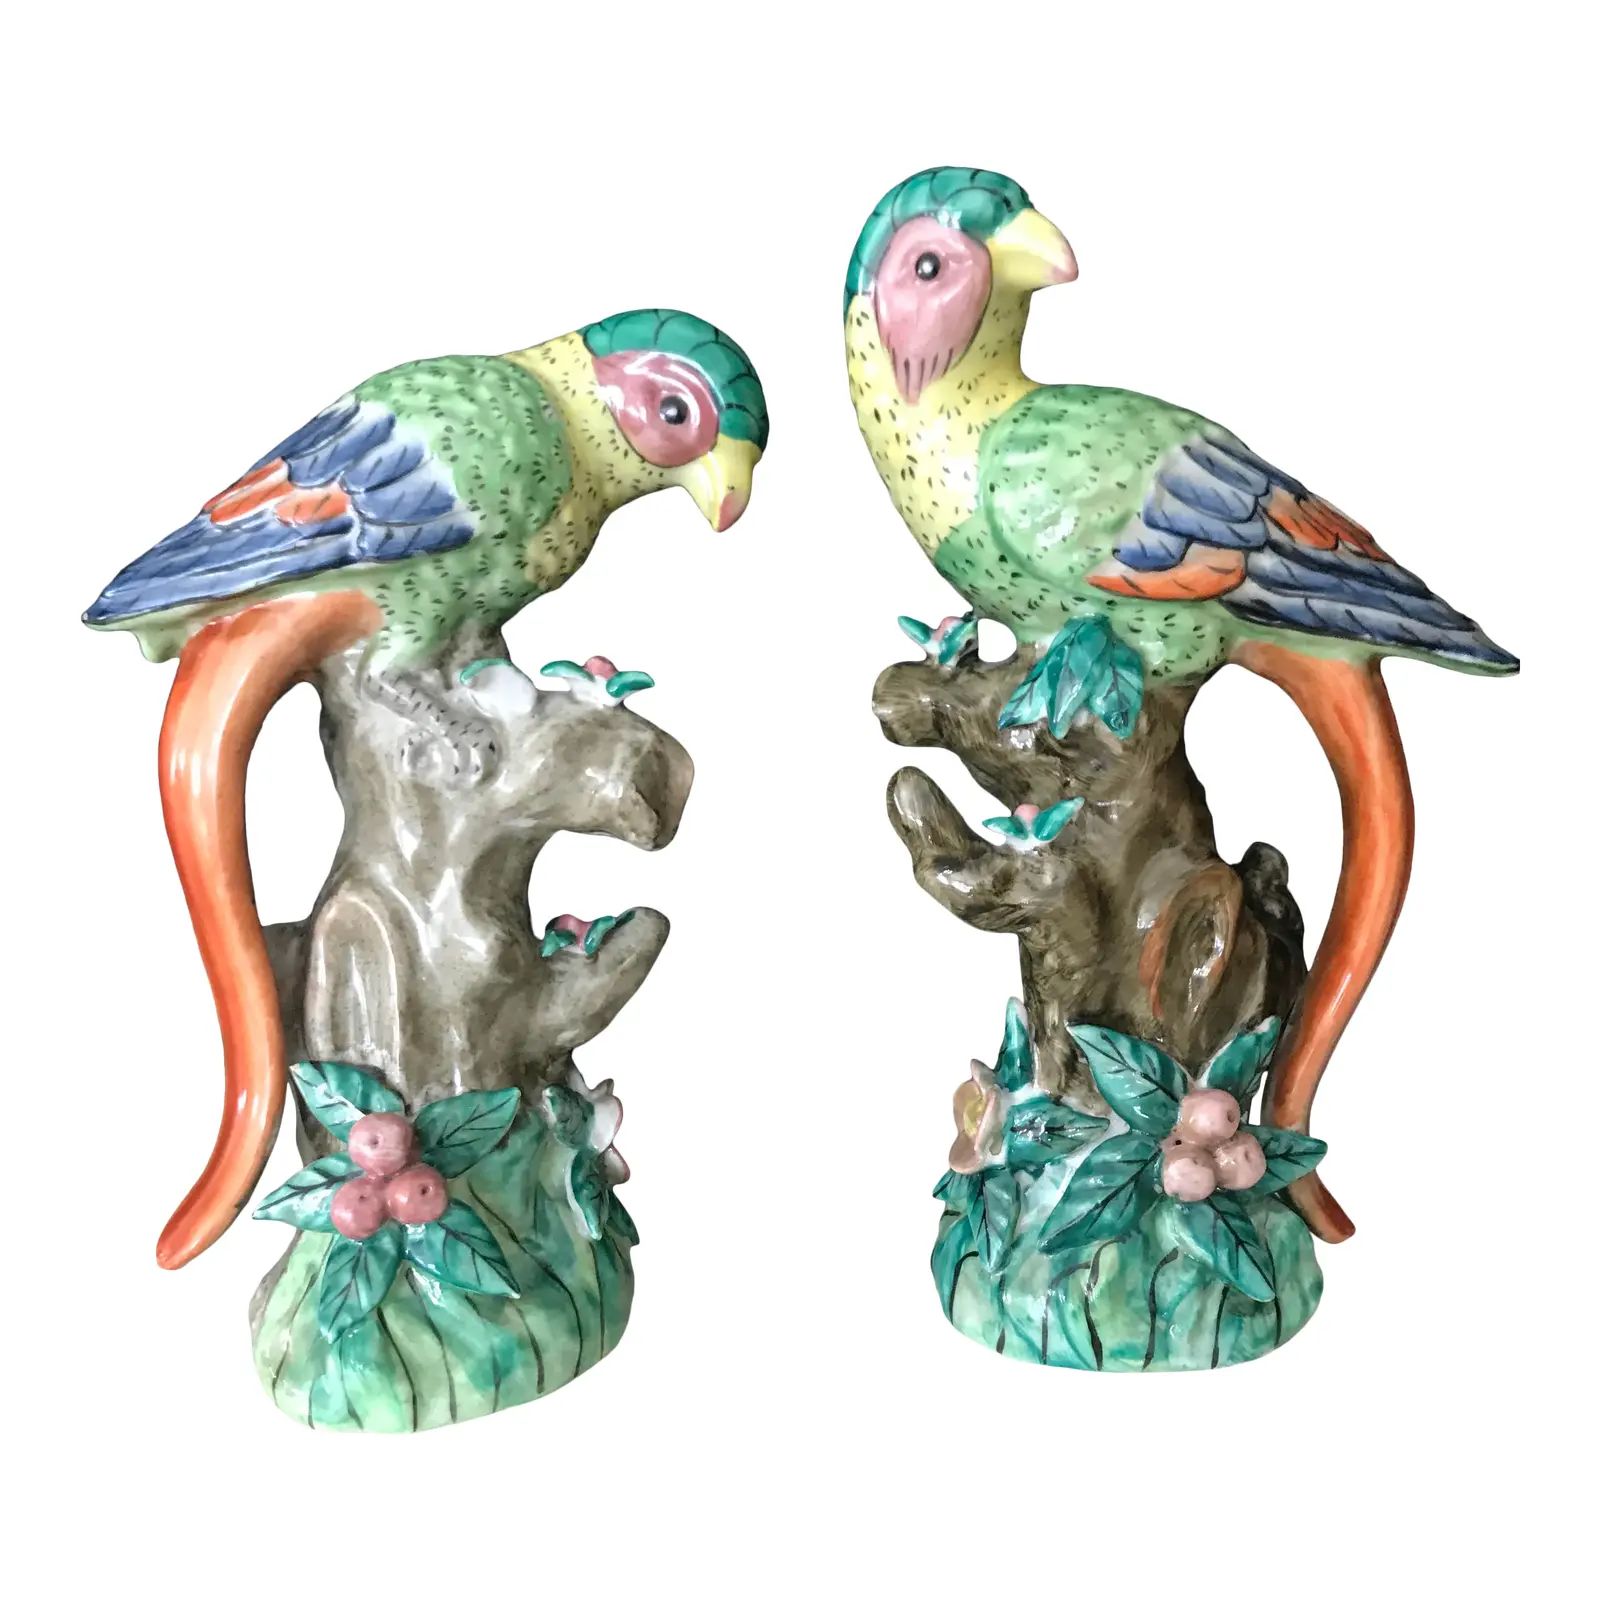 Vintage Hand Painted Colorful Ceramic Long Tail Parrots- a Pair | Chairish